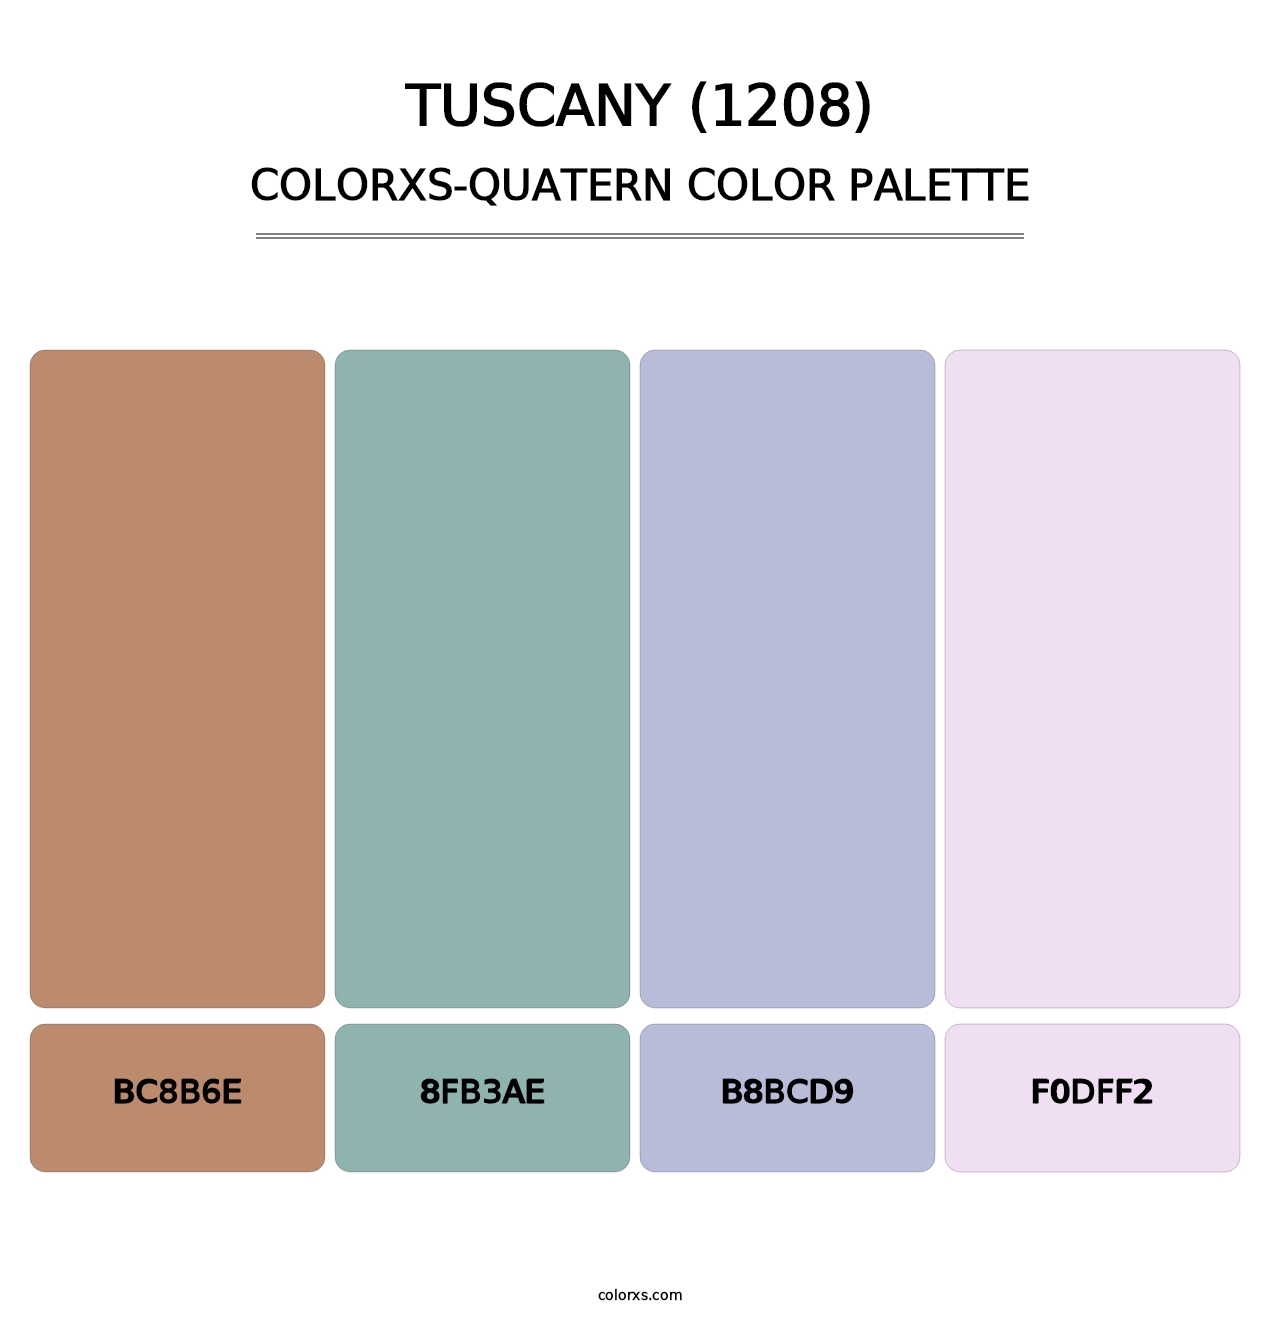 Tuscany (1208) - Colorxs Quatern Palette